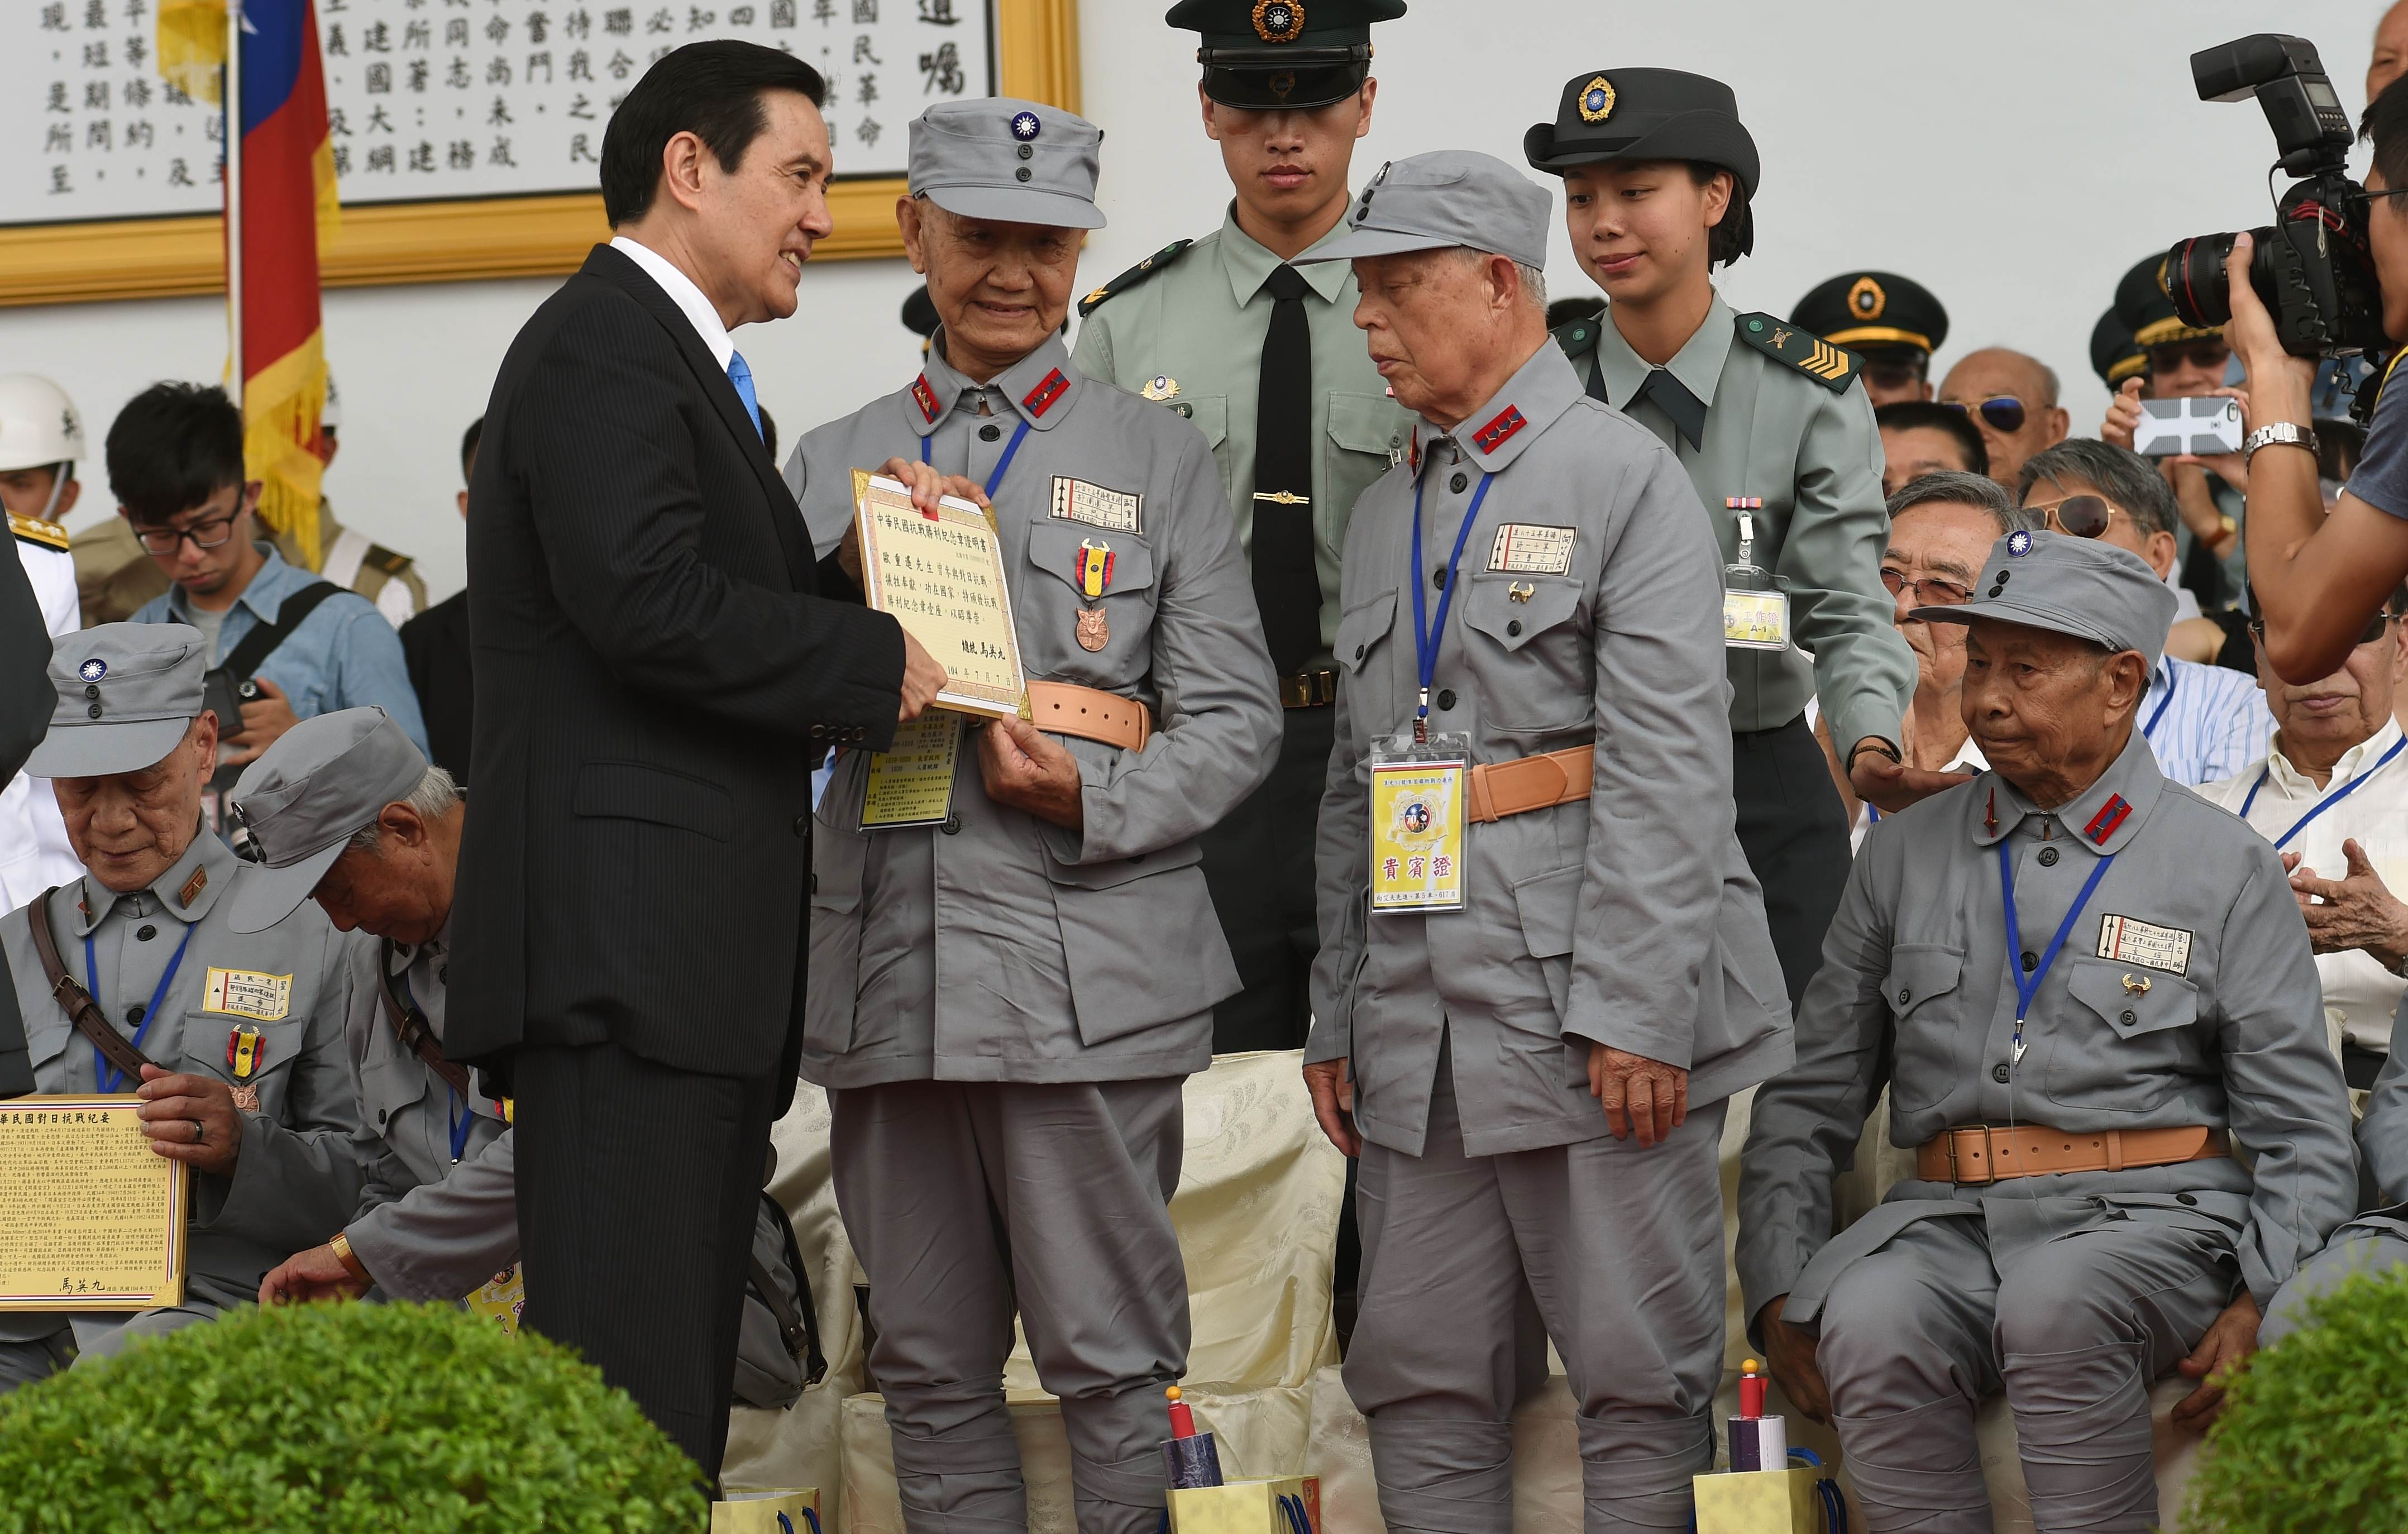  A veteran receives a certificate from President Ma Ying-jeou at the 70th anniversary parade. Photo: AFP